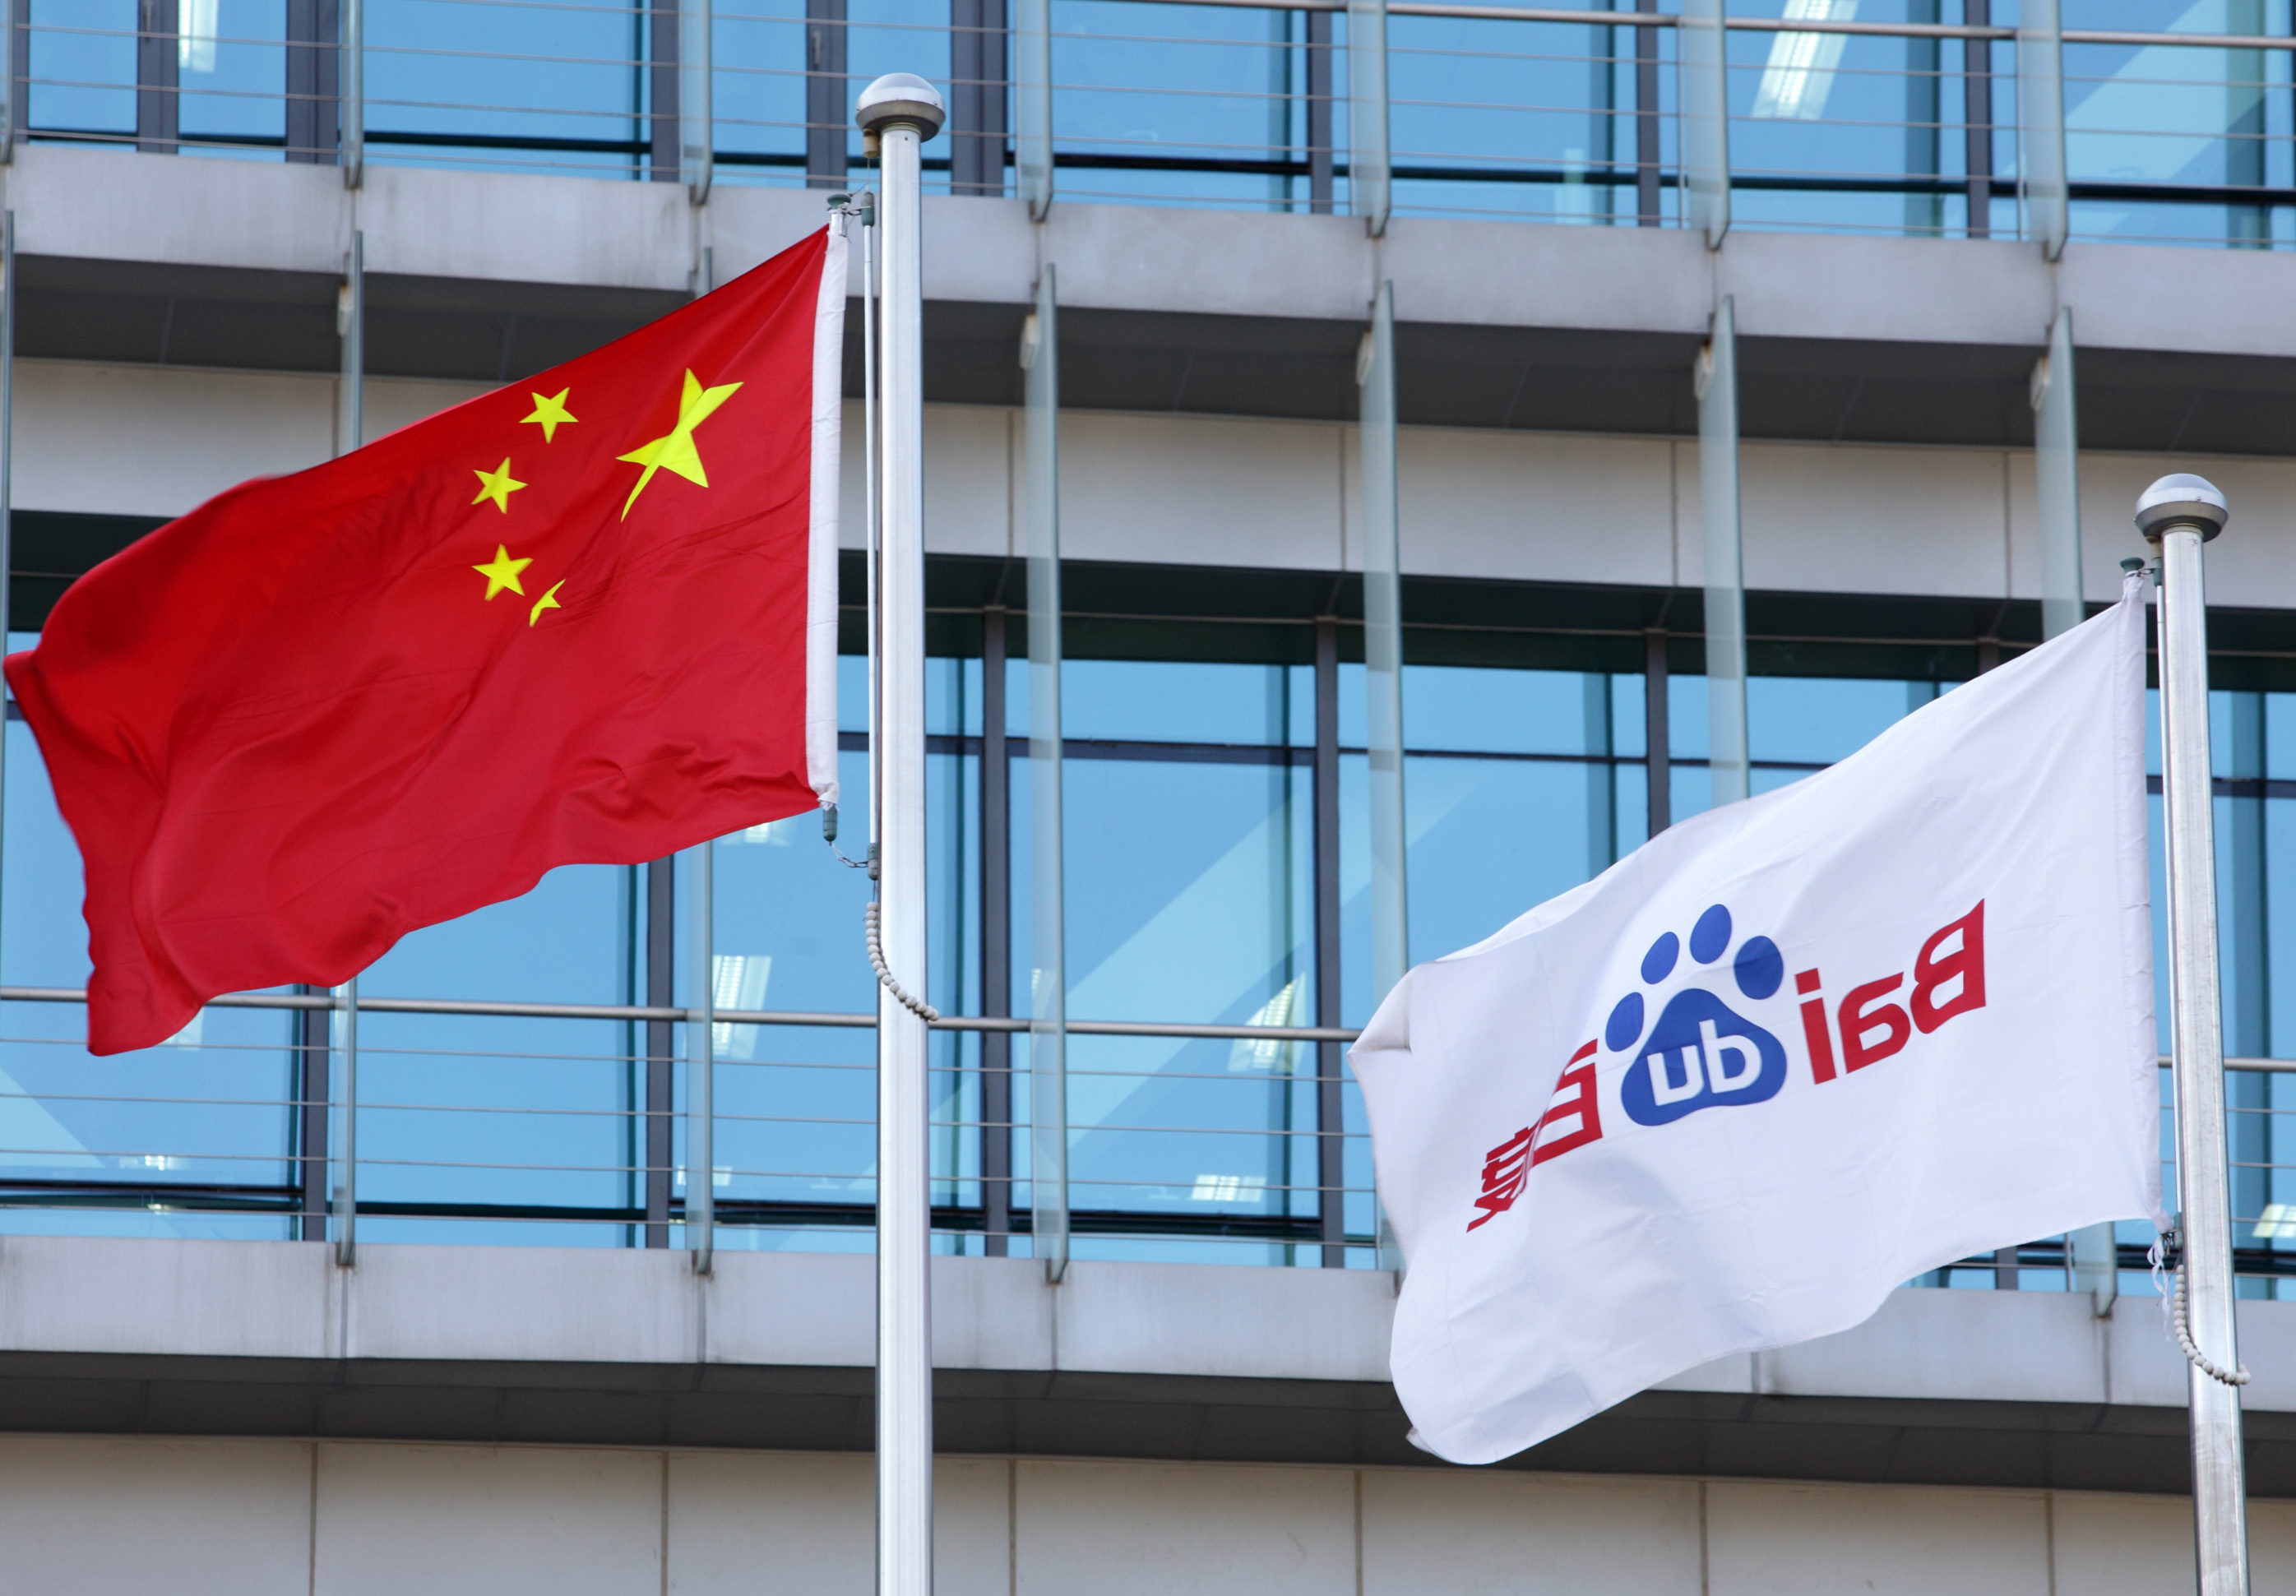 China's national flag, left, and Baidu Inc.'s corporate flag fly outside Baidu's headquarters in Beijing, China, on Monday, Nov. 12, 2012. (Tomohiro Ohsumi—Bloomberg/Getty Images)